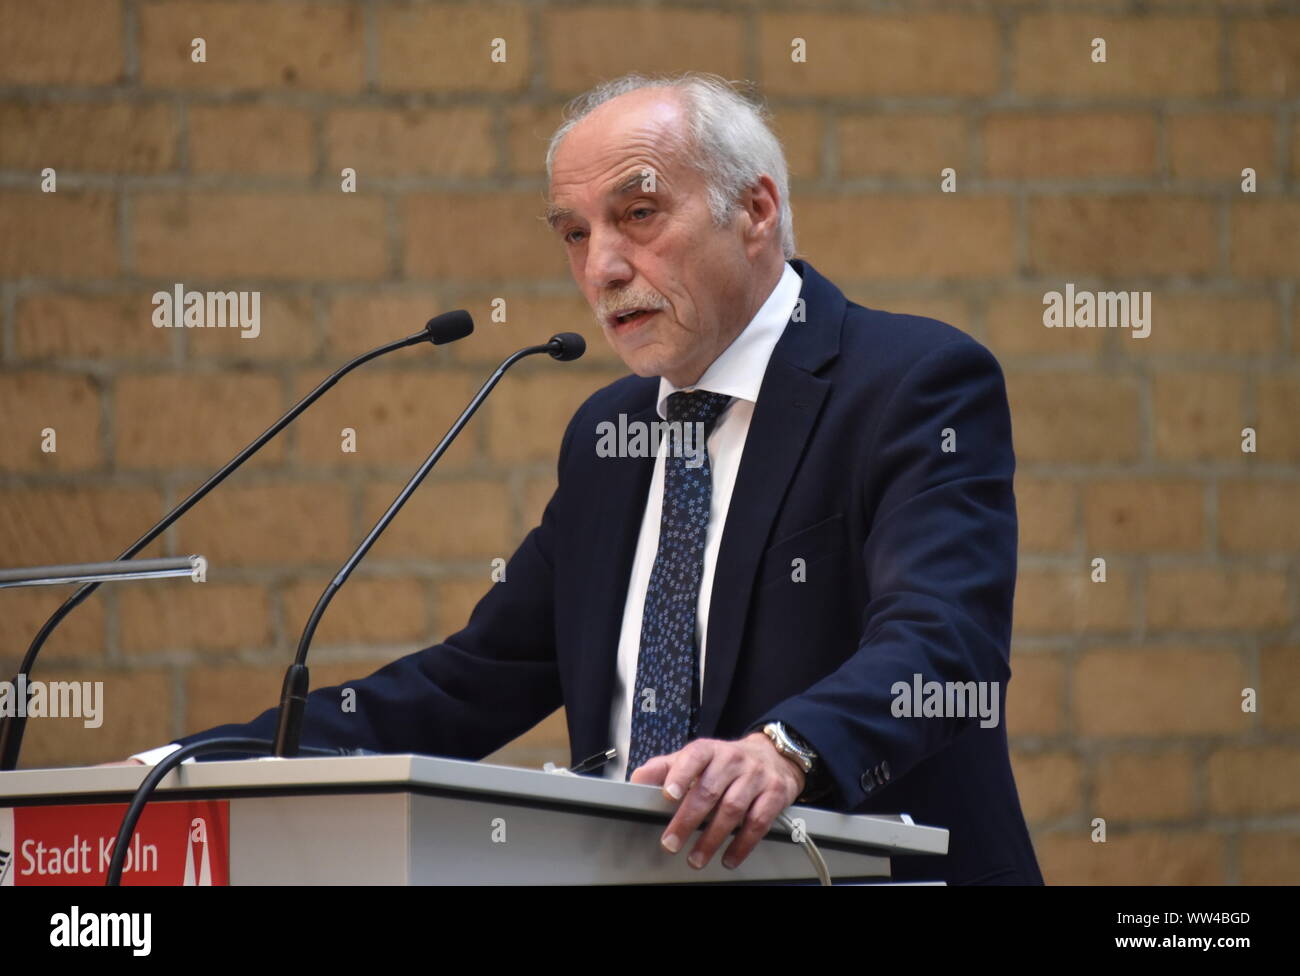 Cologne, Germany. 12th Sep, 2019. The former director of the Max Planck Institute for Biophysical Chemistry, Dr. Herbert Jäckle, speaks at the award ceremony of the K.J. Zülch Prize - The K-J. Zülch Prize of the Gertrud Reemtsma Foundation has been awarded since 1990 for outstanding achievements in basic neurological research. Credit: Horst Galuschka/dpa/Alamy Live News Stock Photo